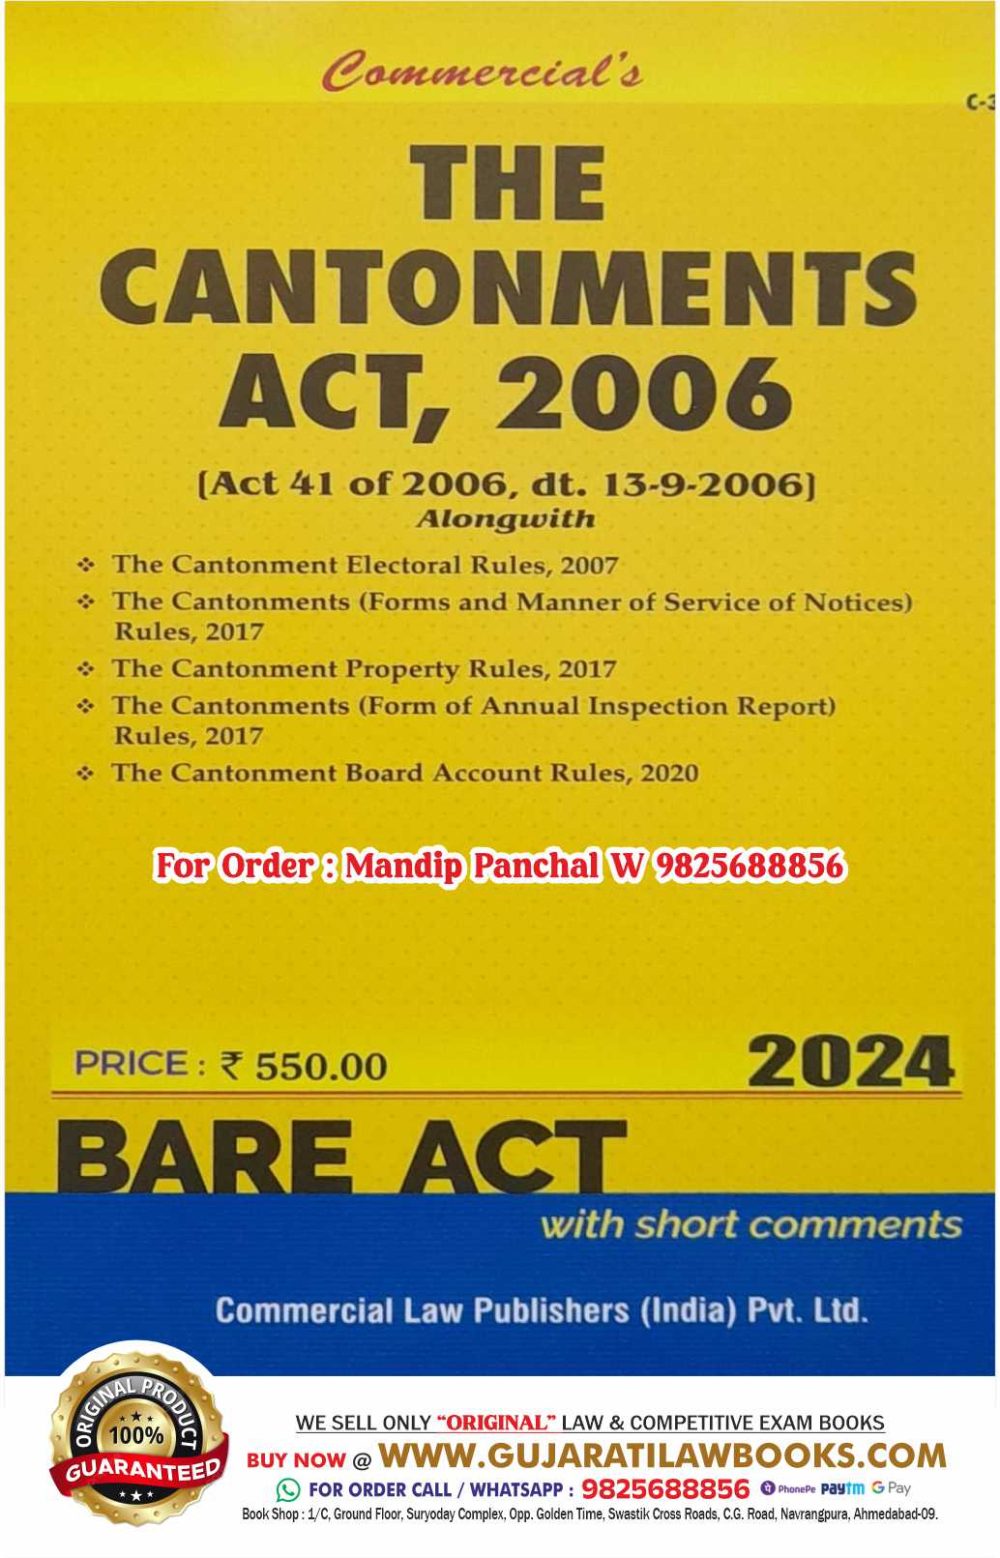 Cantonments Act, 2006 - BARE ACT - Latest 2024 Edition Commercial